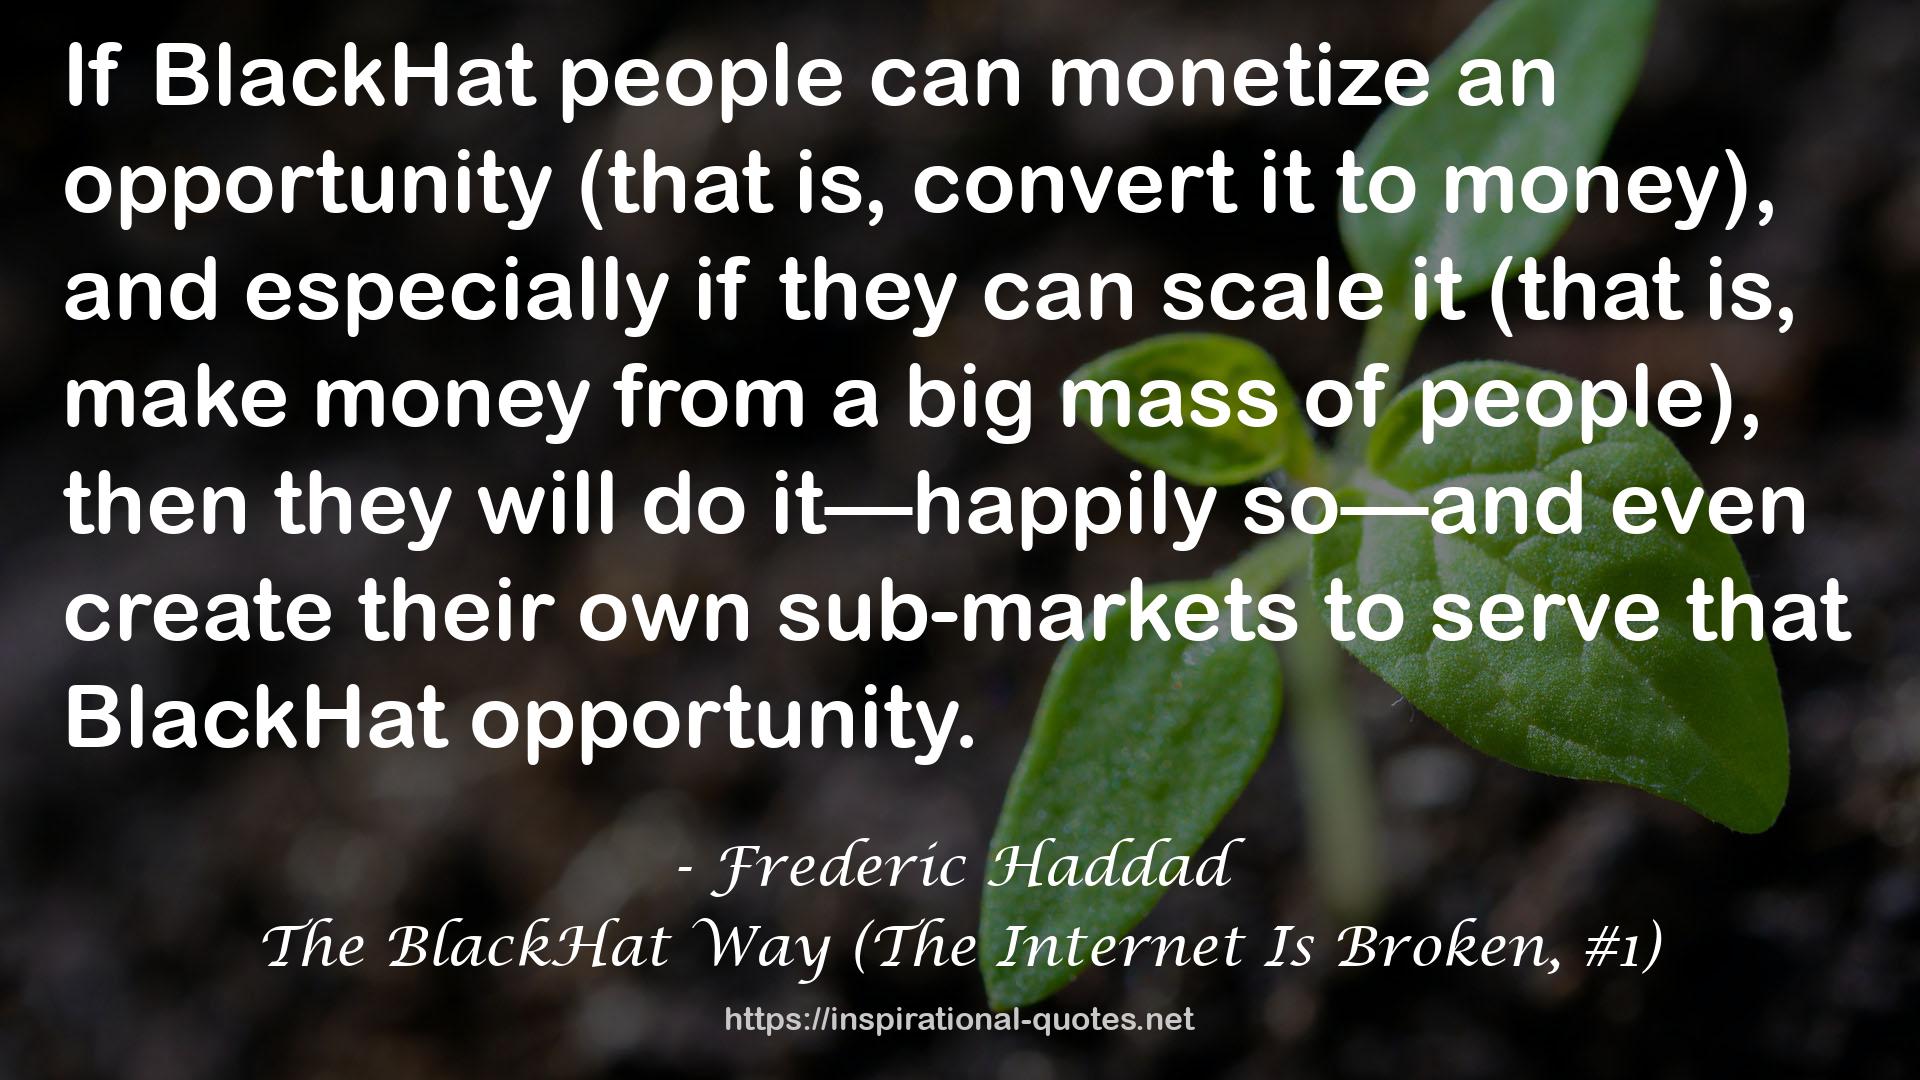 The BlackHat Way (The Internet Is Broken, #1) QUOTES